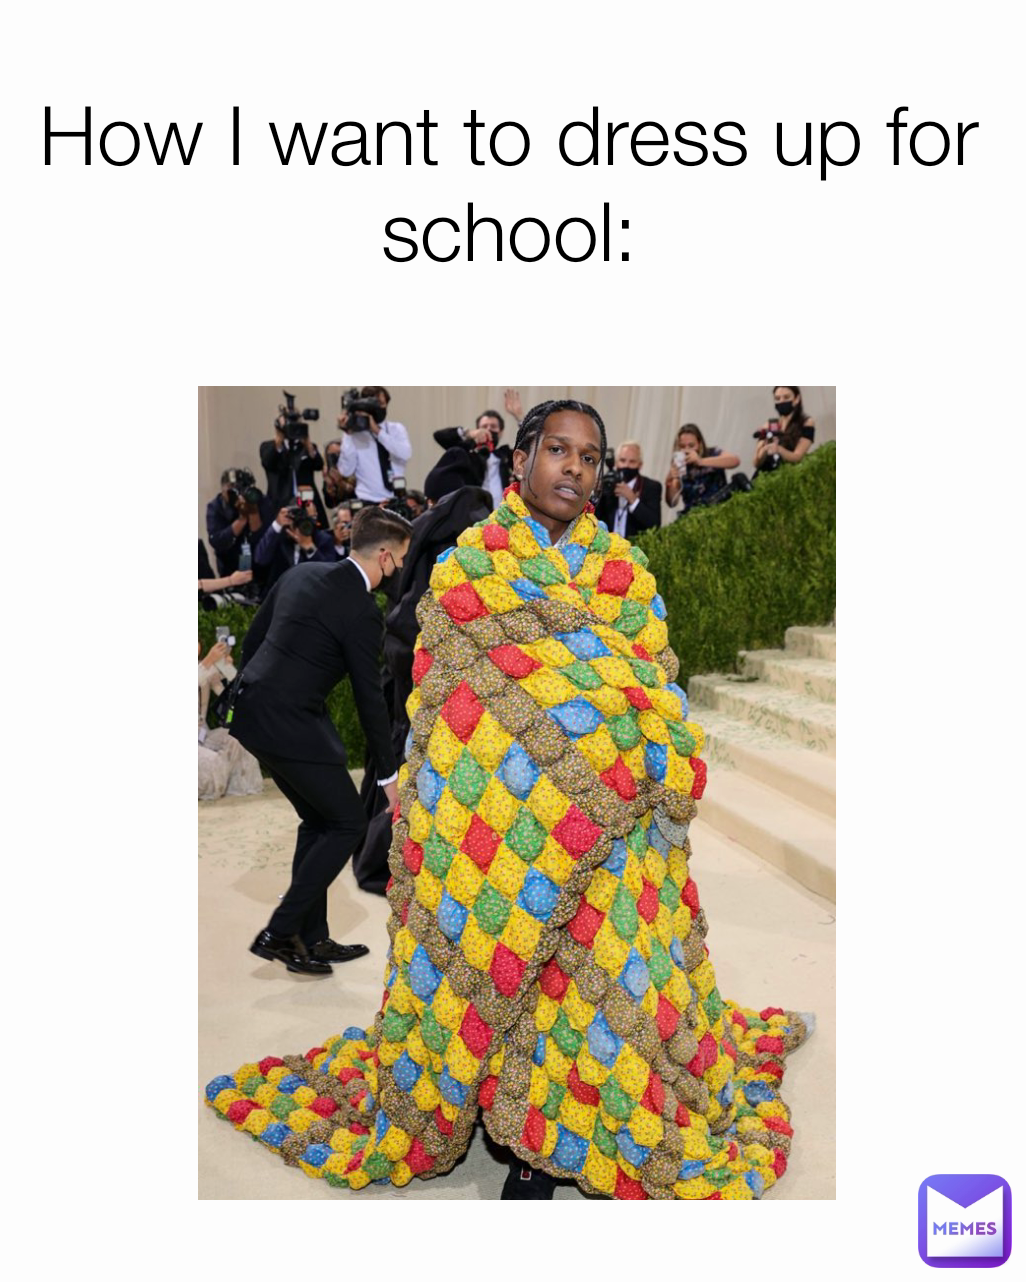 How I want to dress up for school:
